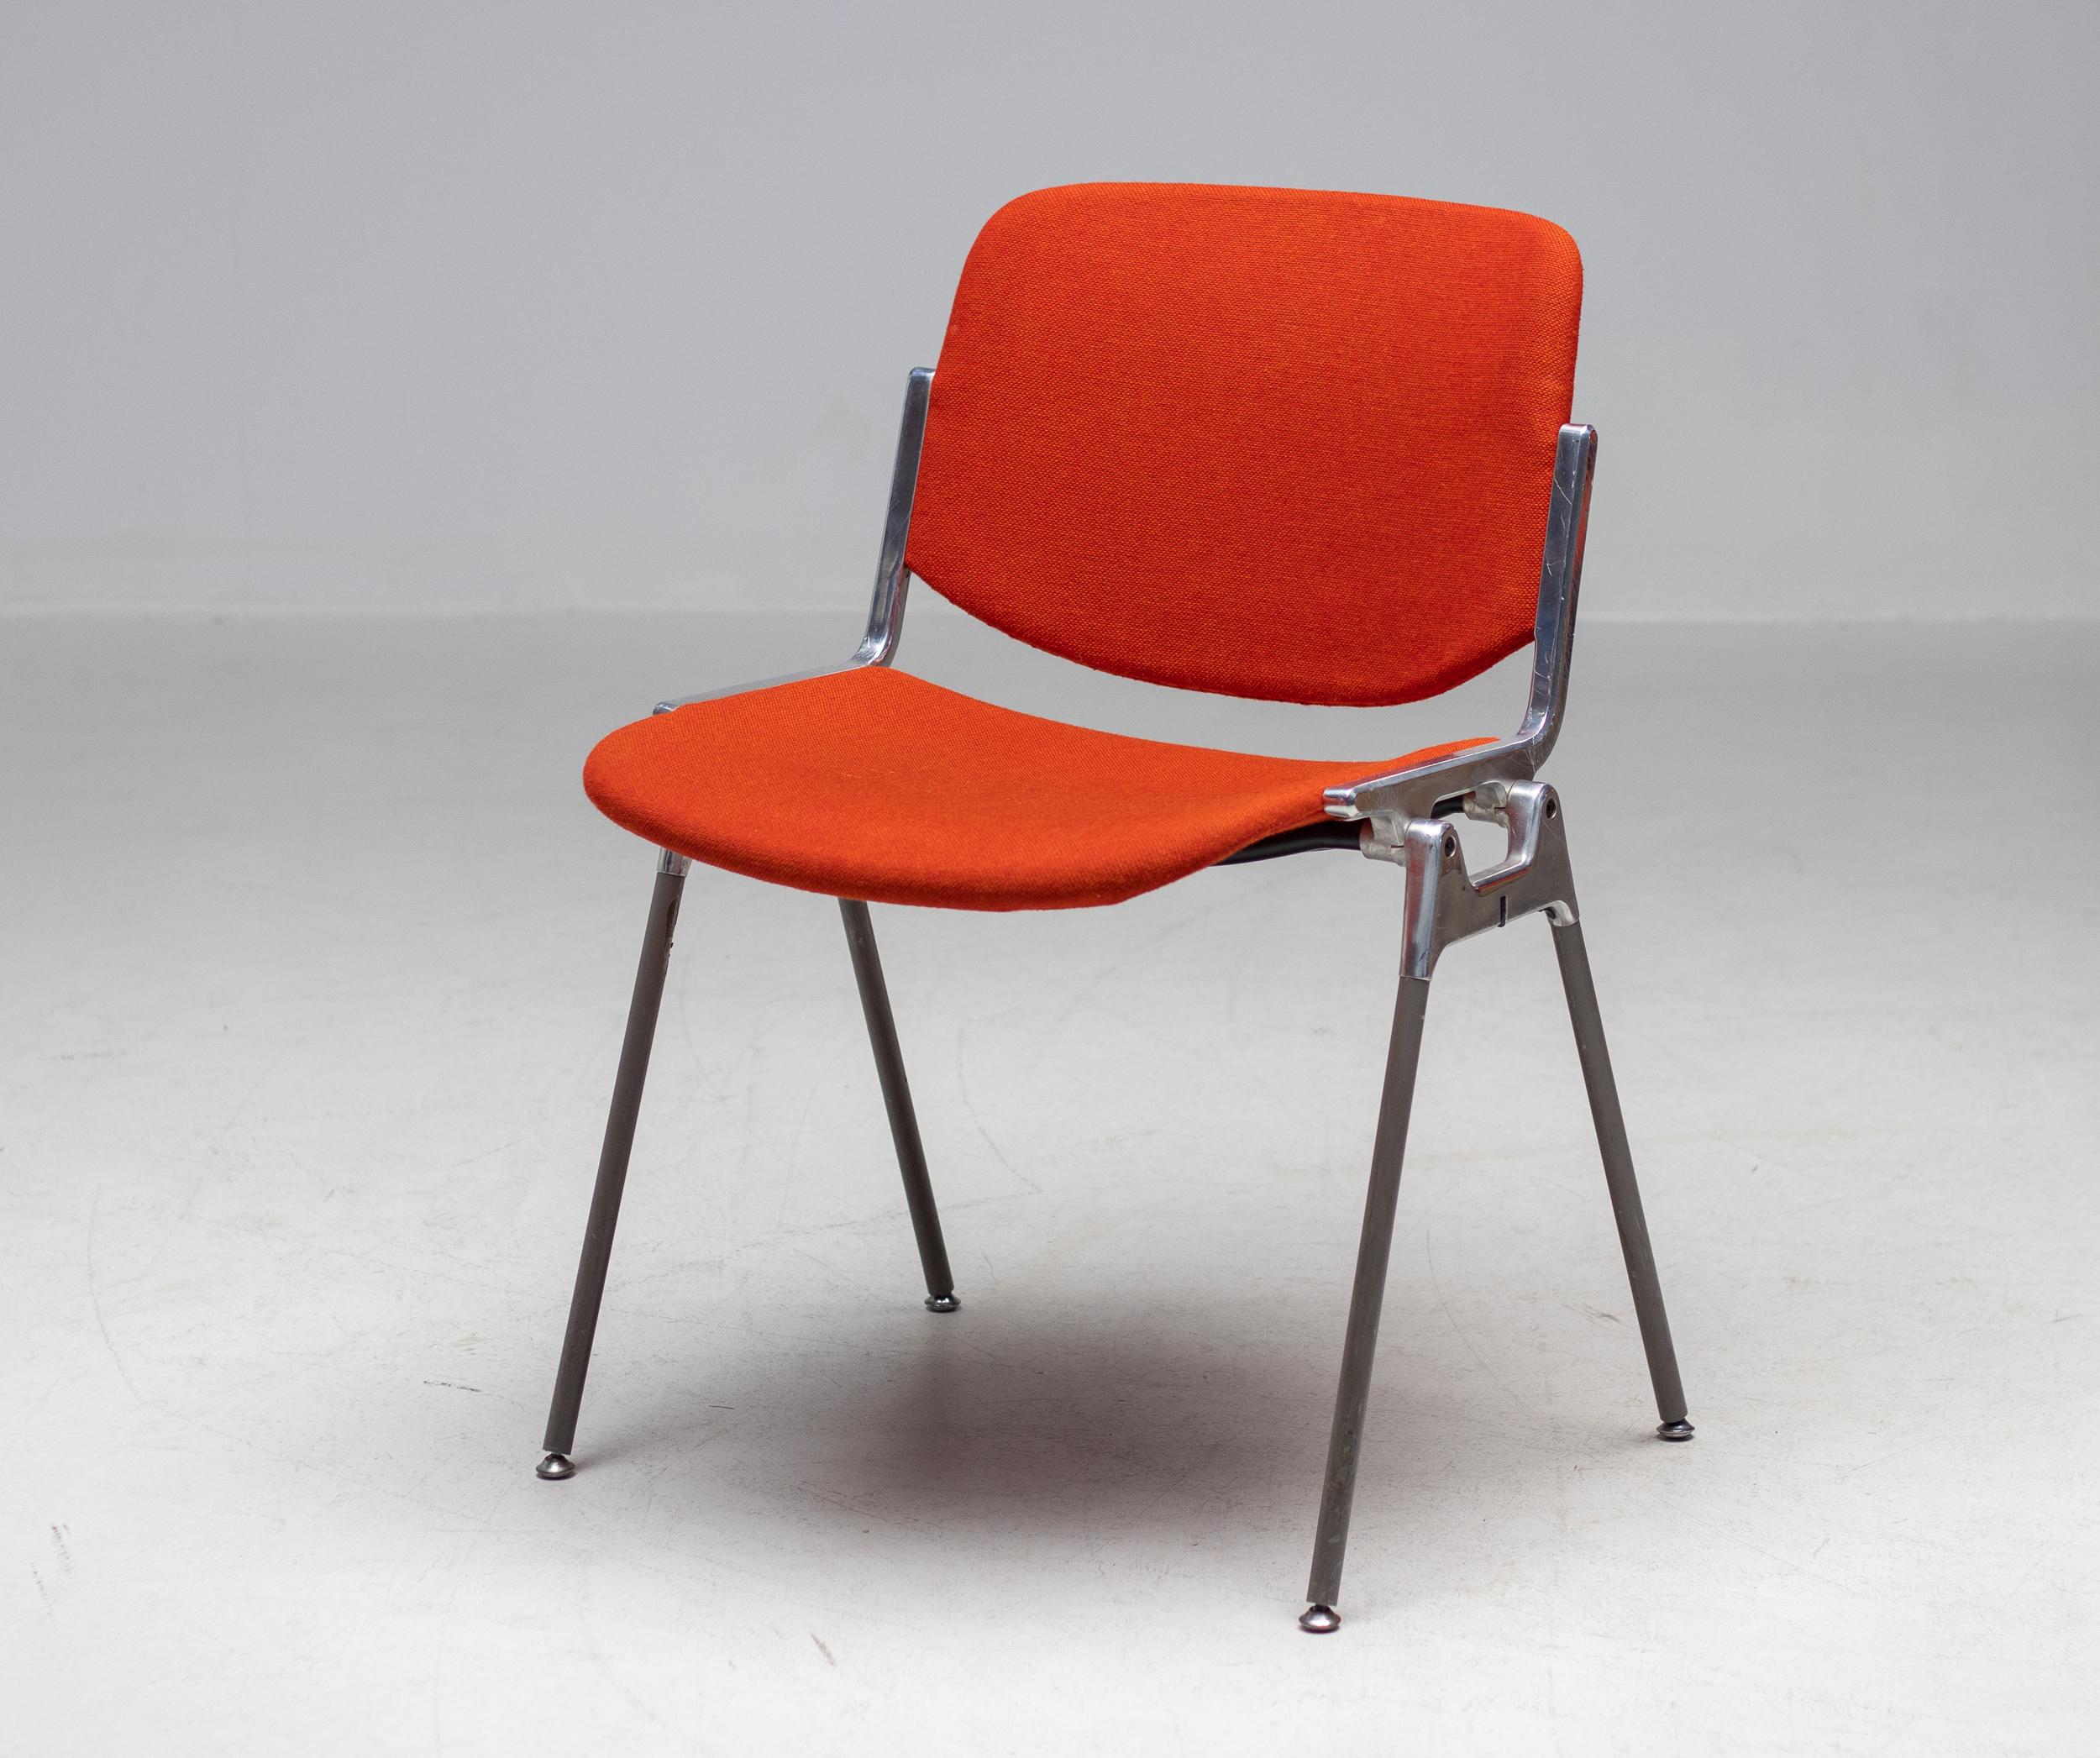 A set of six bright orange/red Giancarlo Piretti DSC 106 chairs.
Form and function joined in the design of these renown stacking chairs by Giancarlo Piretti for Anonima Castelli. Upholstered beech plywood seat and back on a sturdy molded aluminum